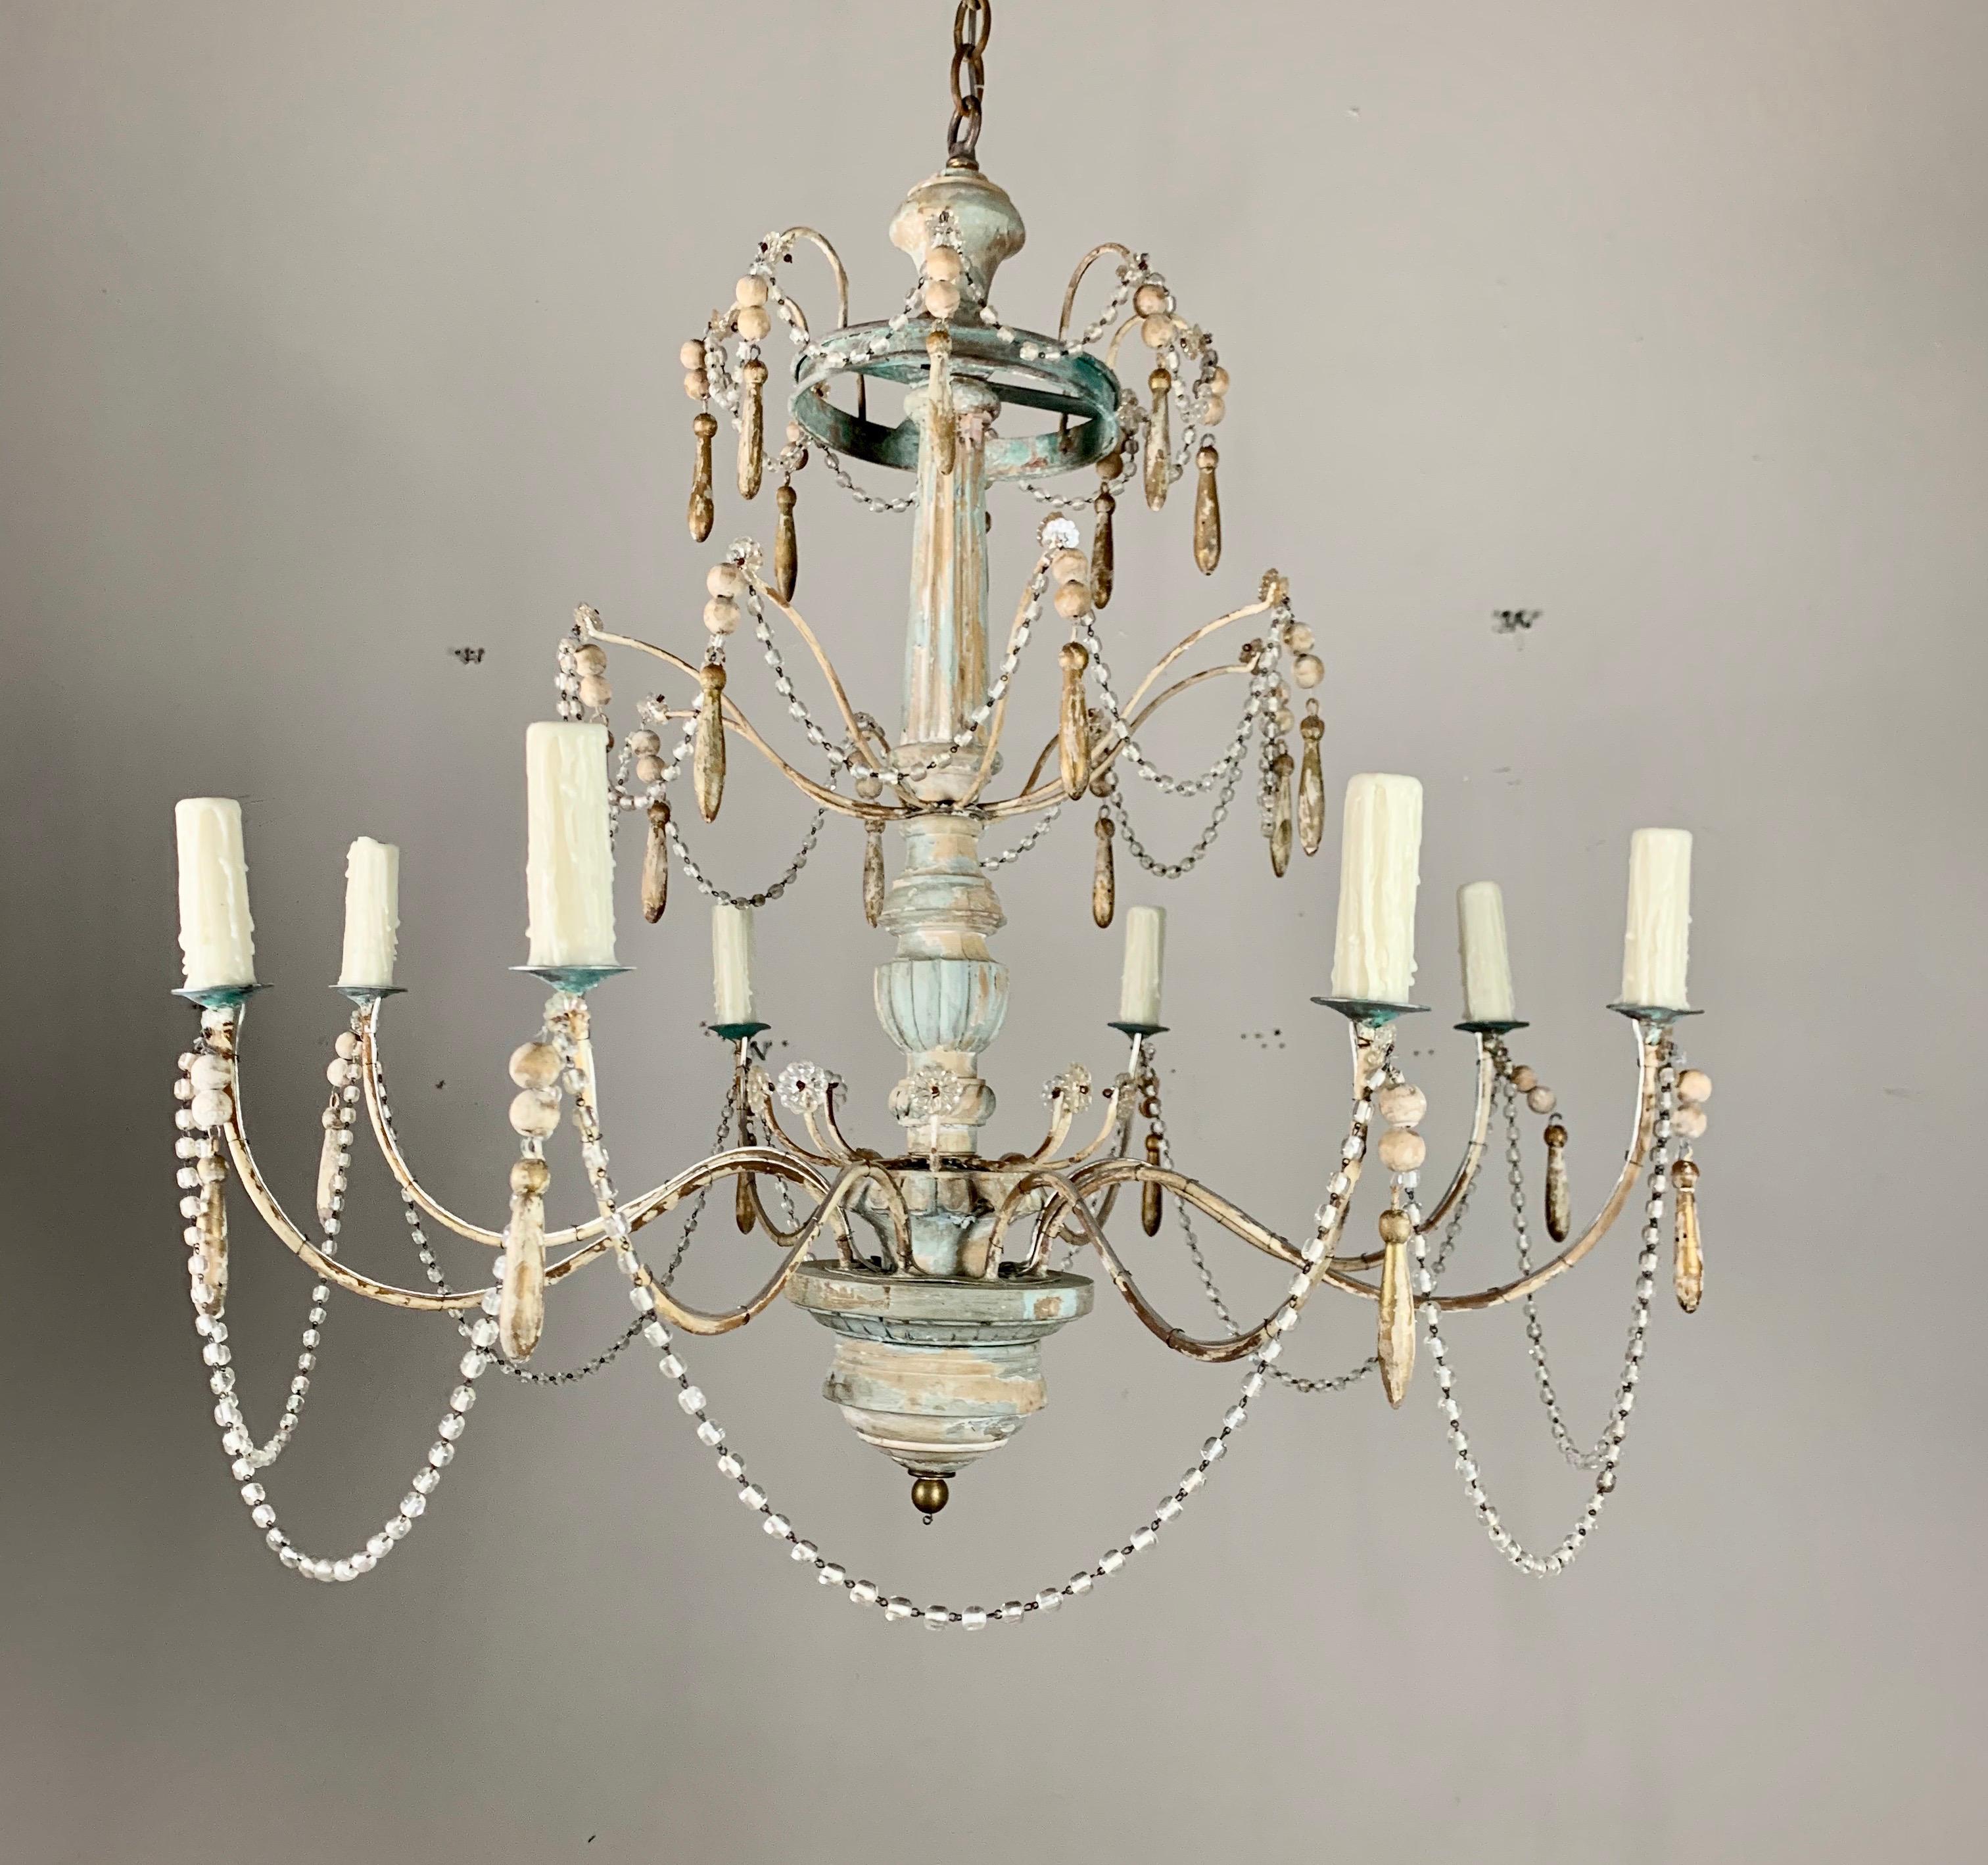 Pair of 8-light painted wood and metal chandeliers by Melissa Levinson Antiques. We can make these in any painted or gilt wood finish. We also sell them as a single or a pair. Wired with drip wax candle covers and includes chain and canopies.